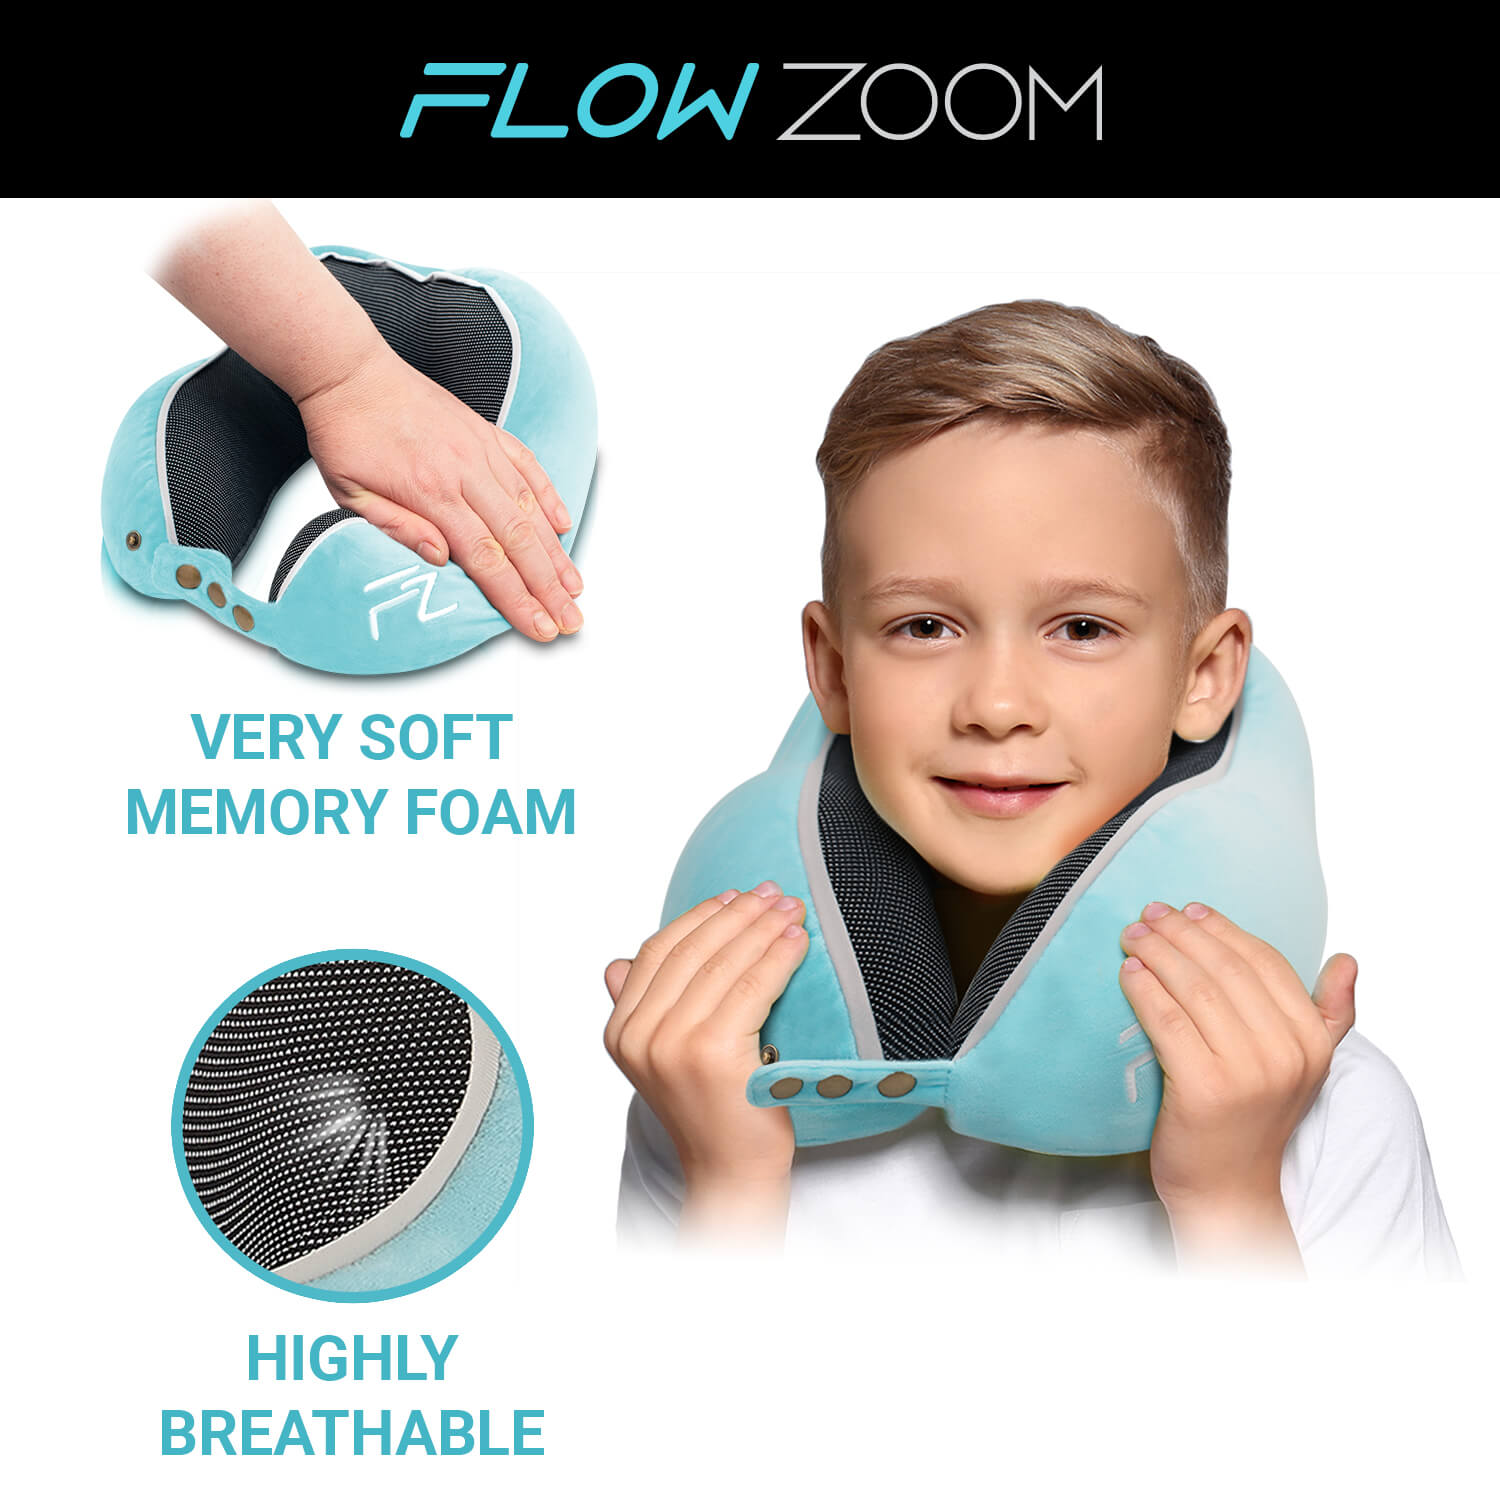 COMFY Memory foam travel pillow for kids - soft and breathable